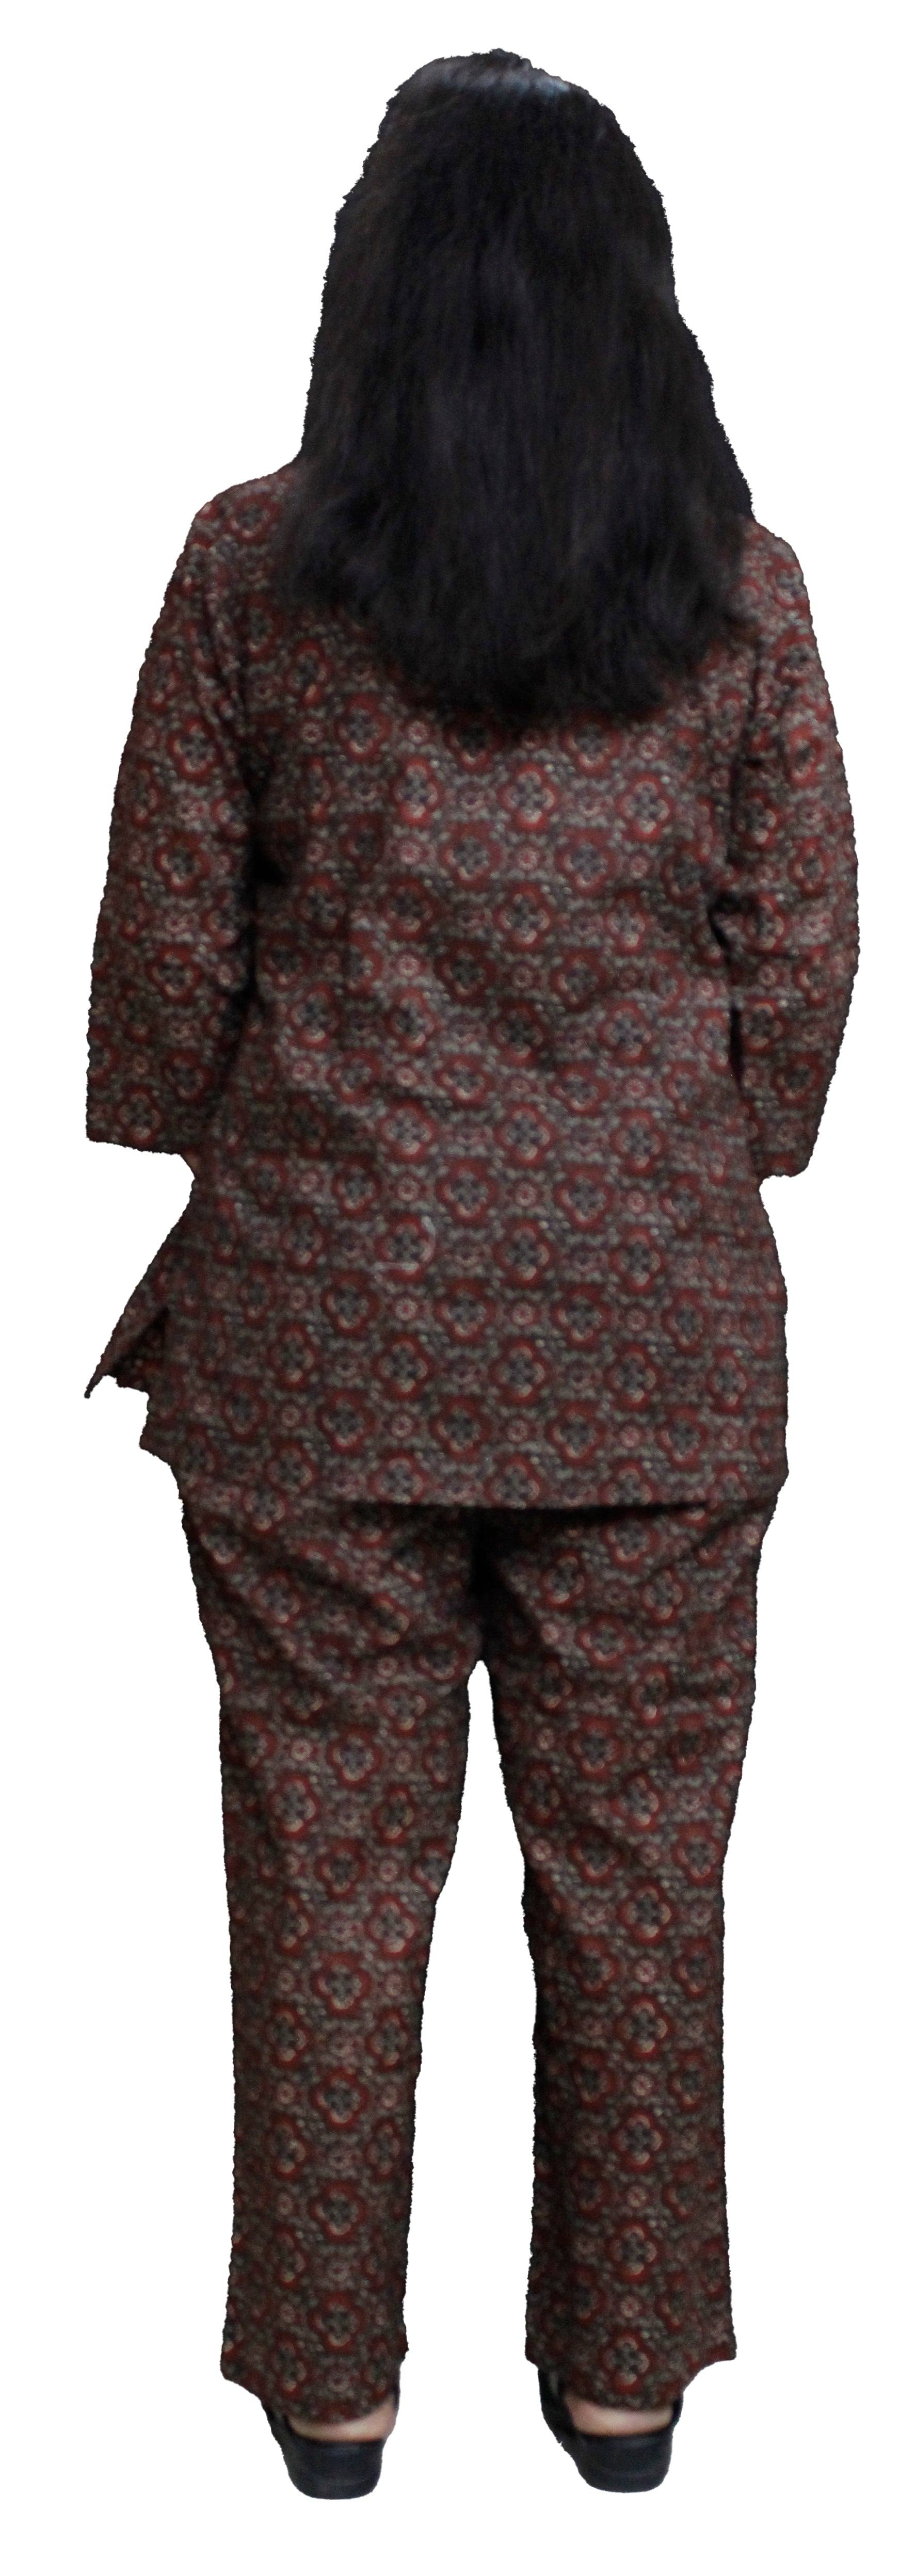 Elegant Brown Floral Night Suit: Embrace Comfort and Style